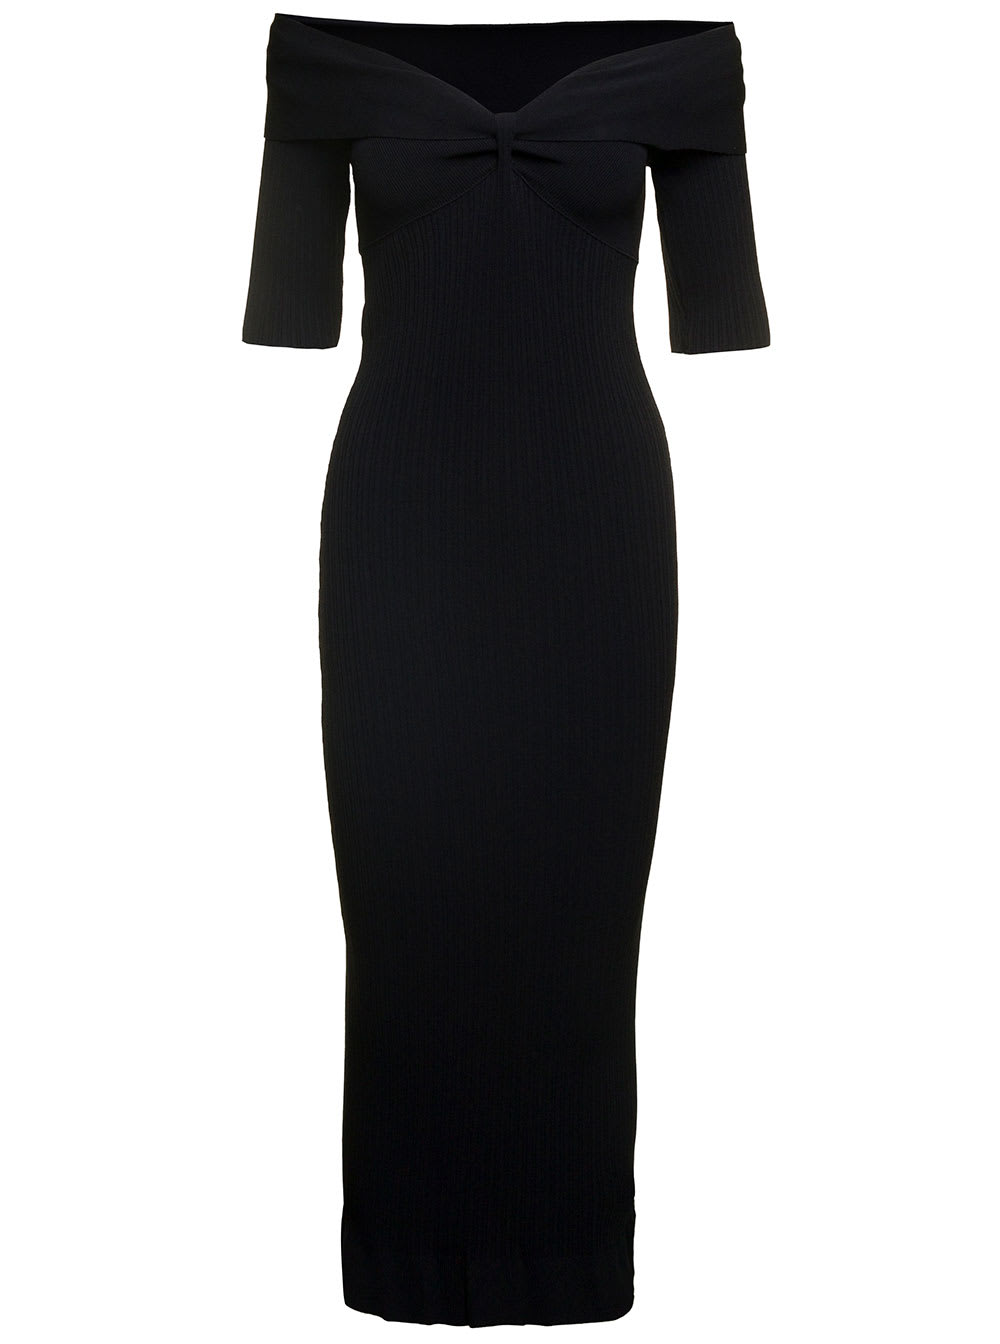 PHILOSOPHY DI LORENZO SERAFINI BLACK RIBBED MAXI DRESS WITH BRAIDED DETAIL IN VISCOSE BLEND WOMAN